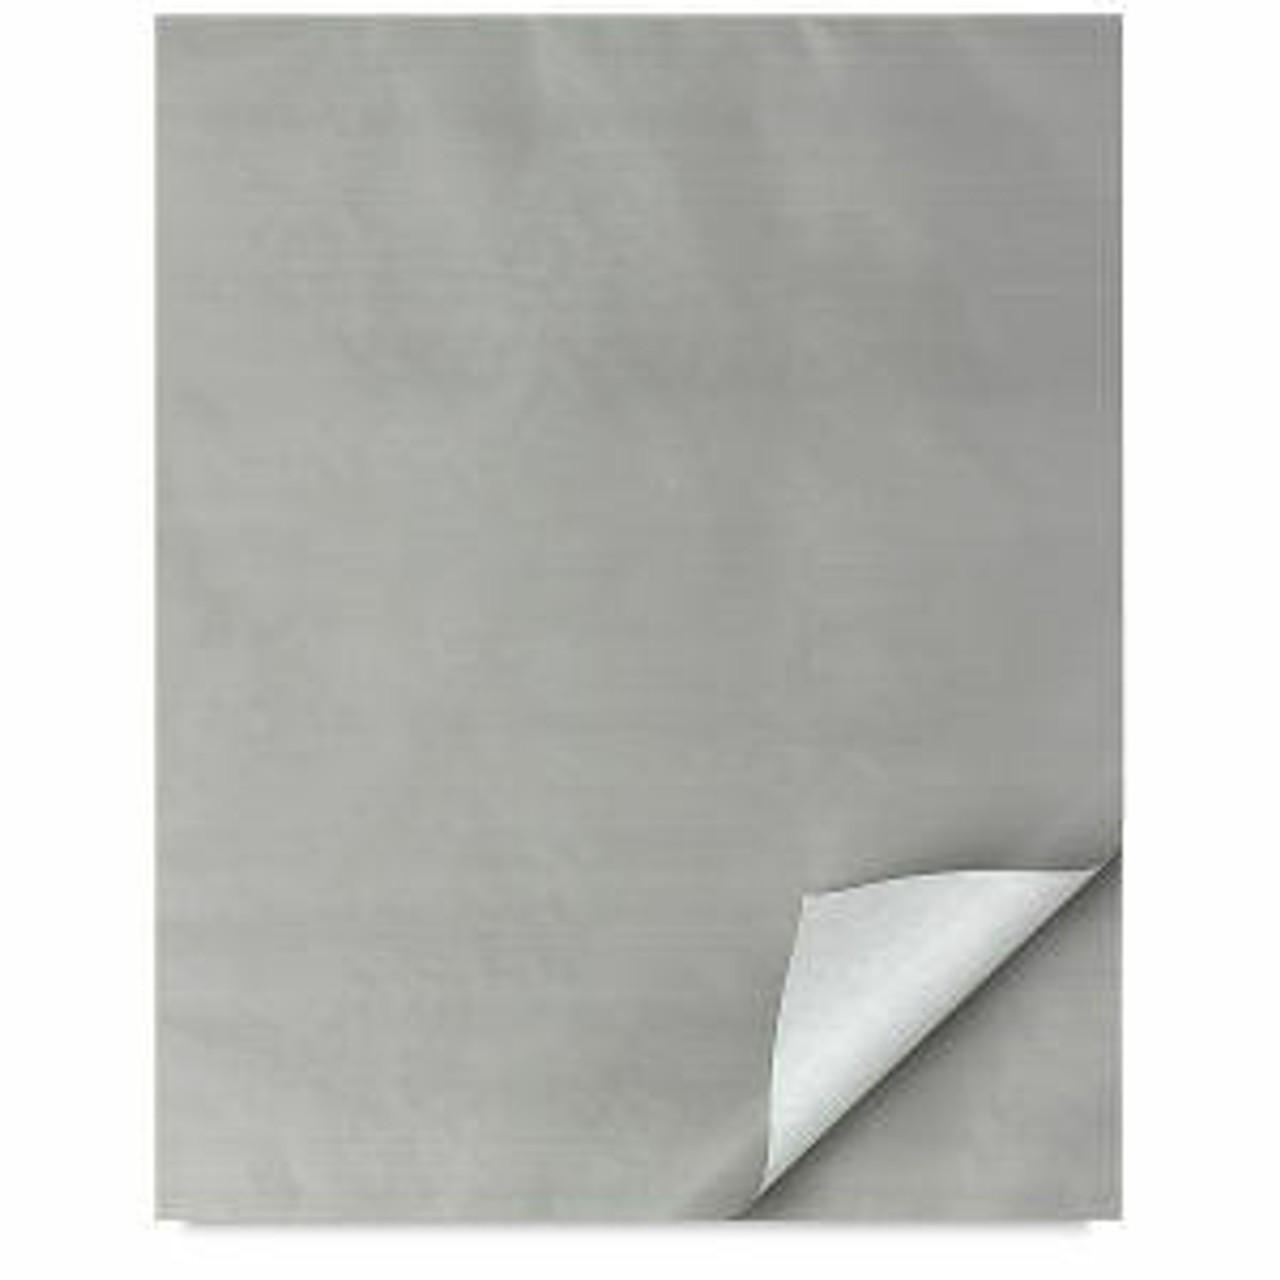 Pearl Gray Construction Paper 12X18 50 Sheets - ROS60702, Roselle Paper  Company, Inc